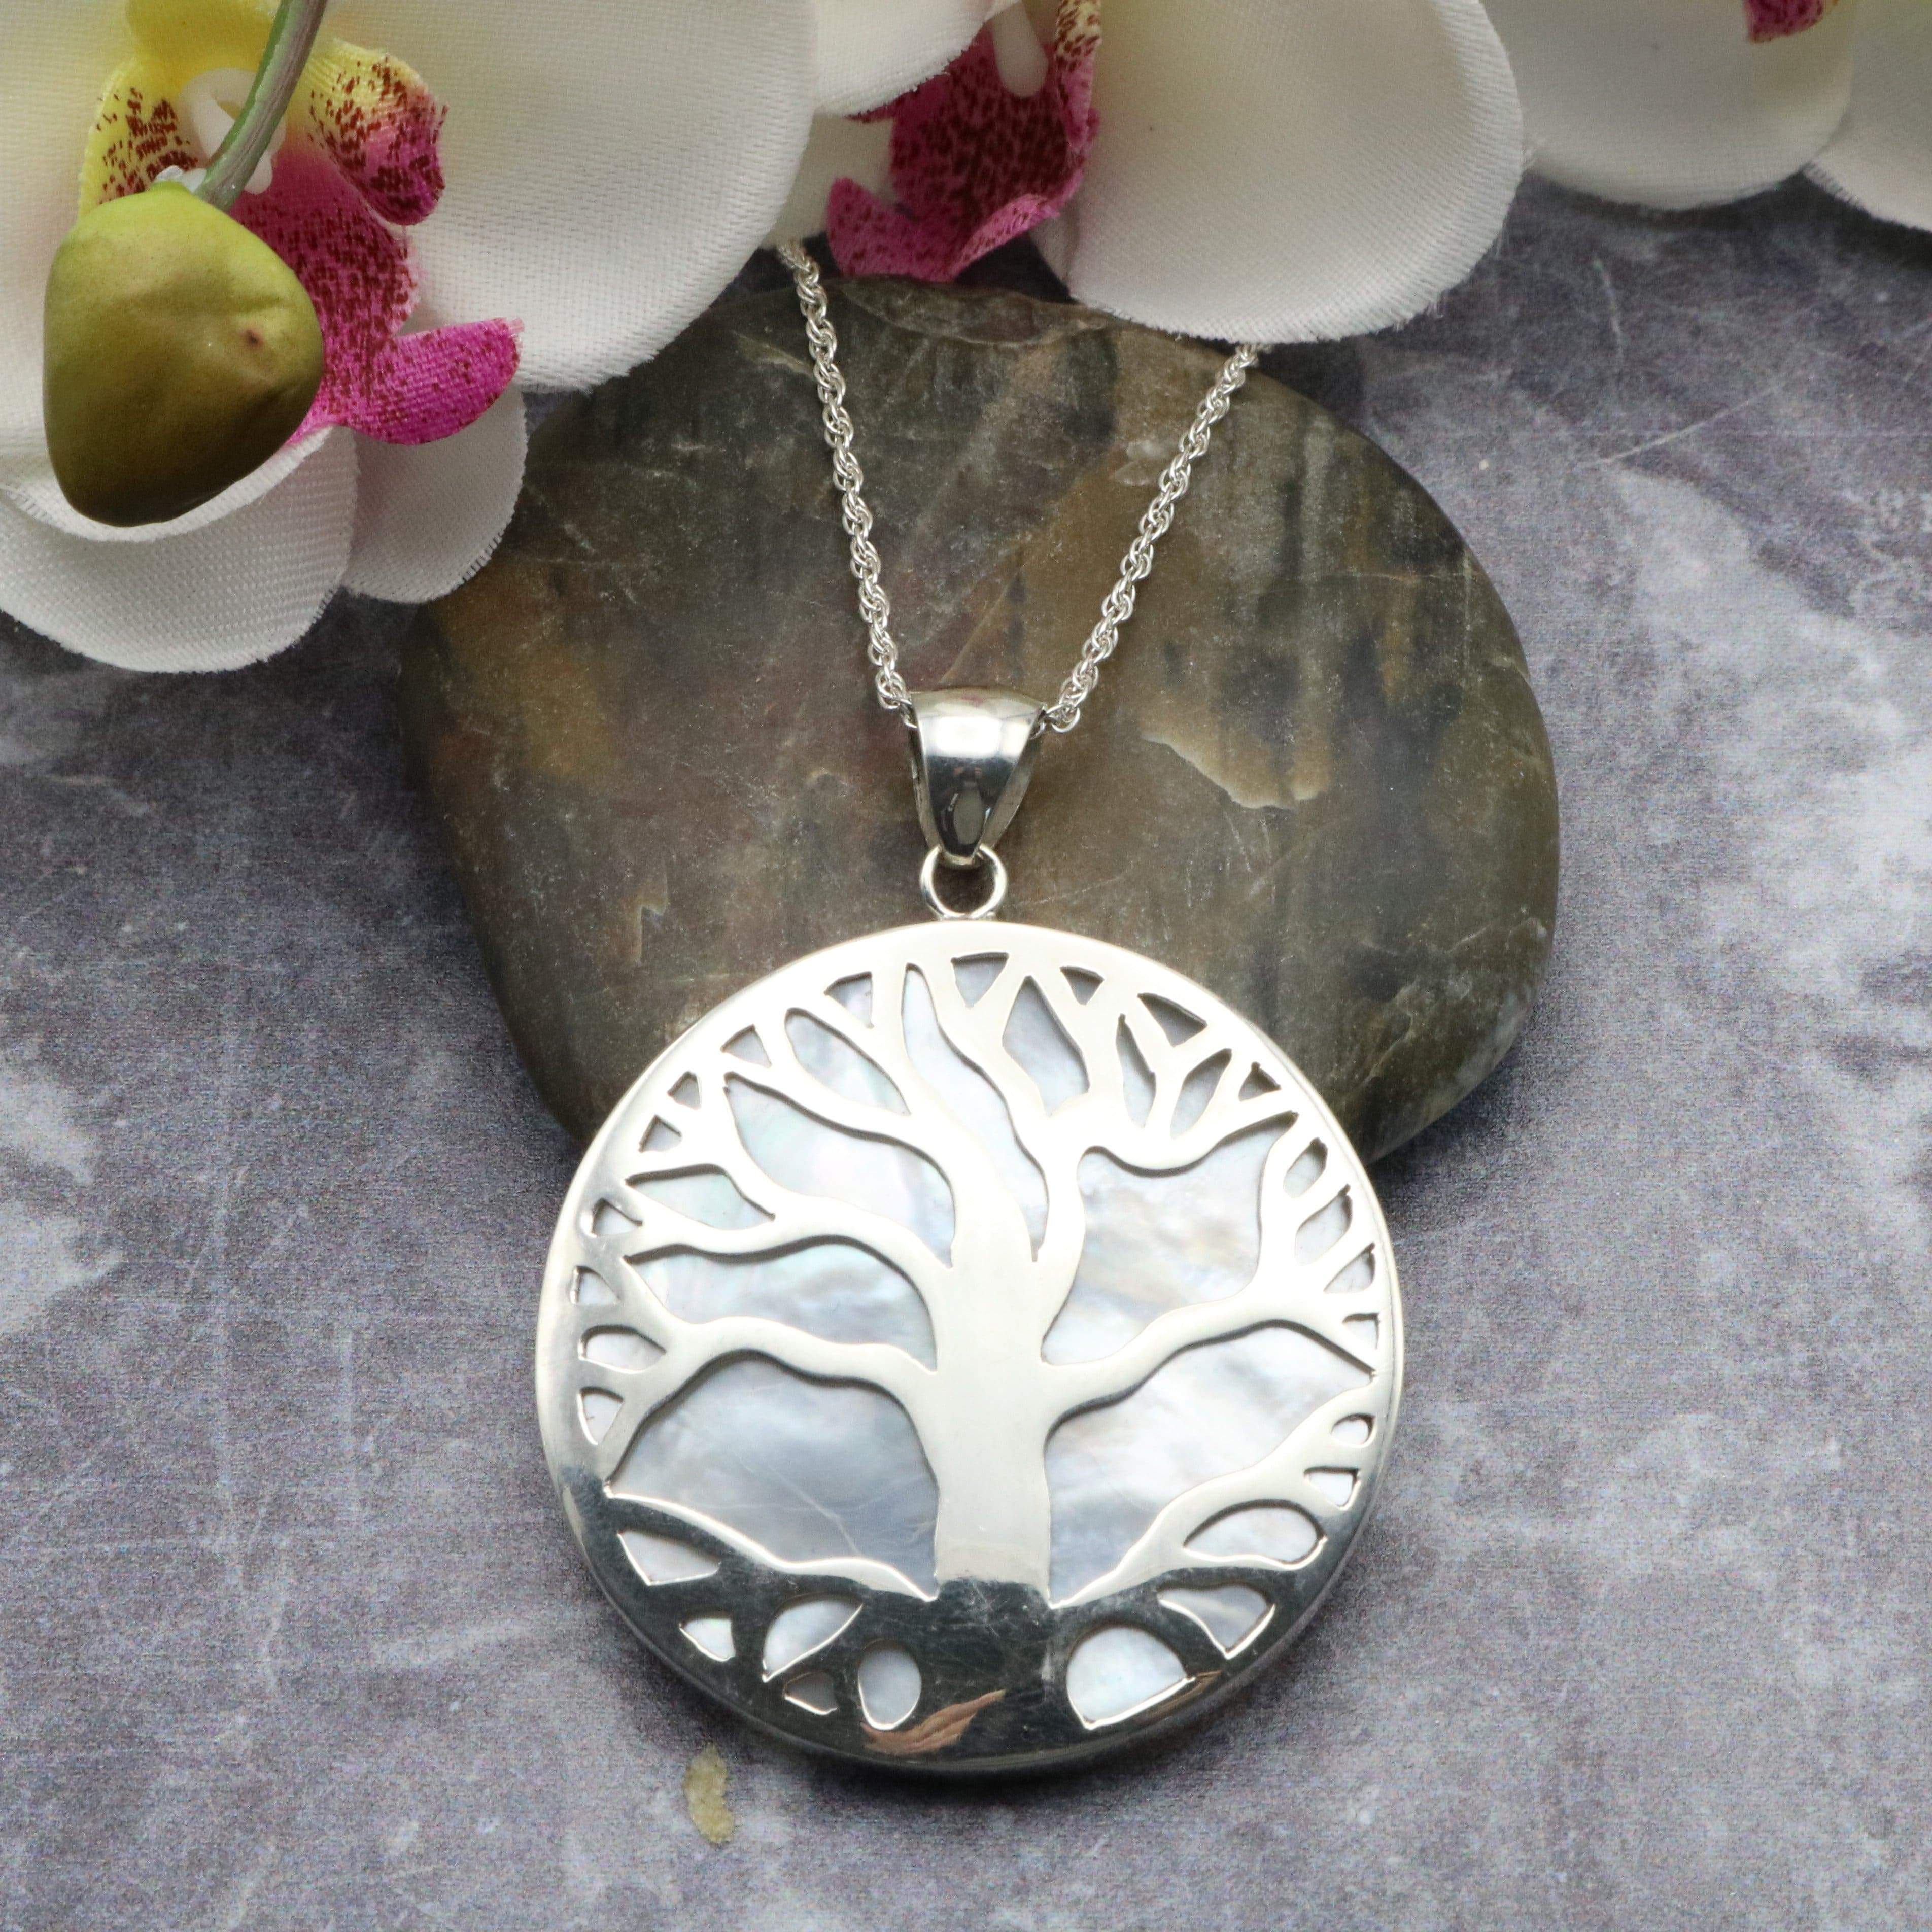 Sterling Silver Or Gold Tree Of Life Necklace By Hersey Silversmiths |  notonthehighstreet.com